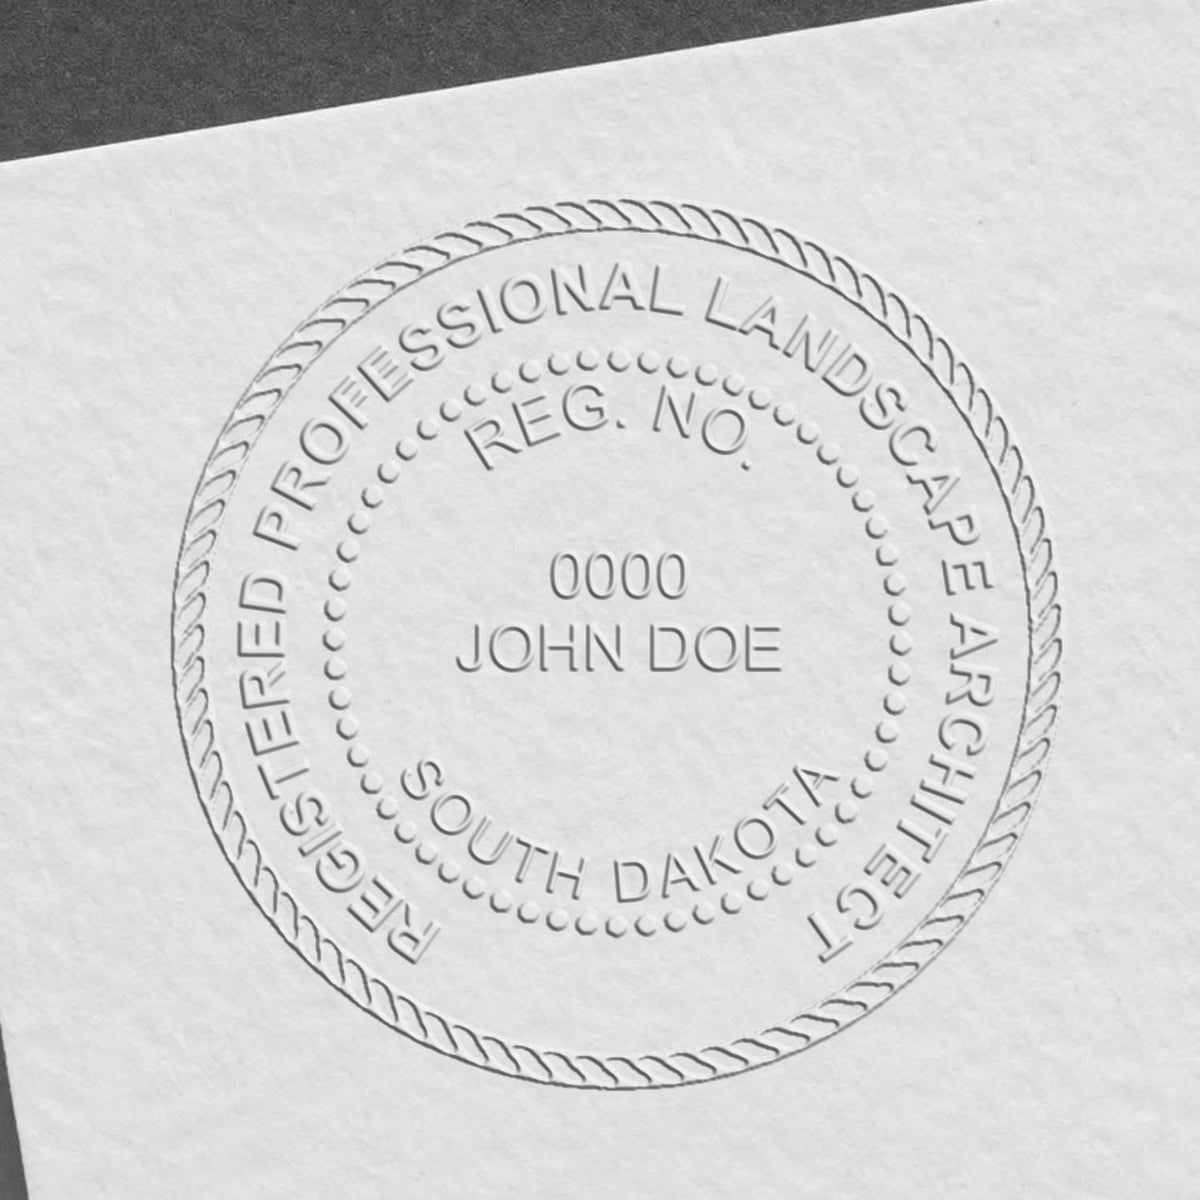 A photograph of the Hybrid South Dakota Landscape Architect Seal stamp impression reveals a vivid, professional image of the on paper.